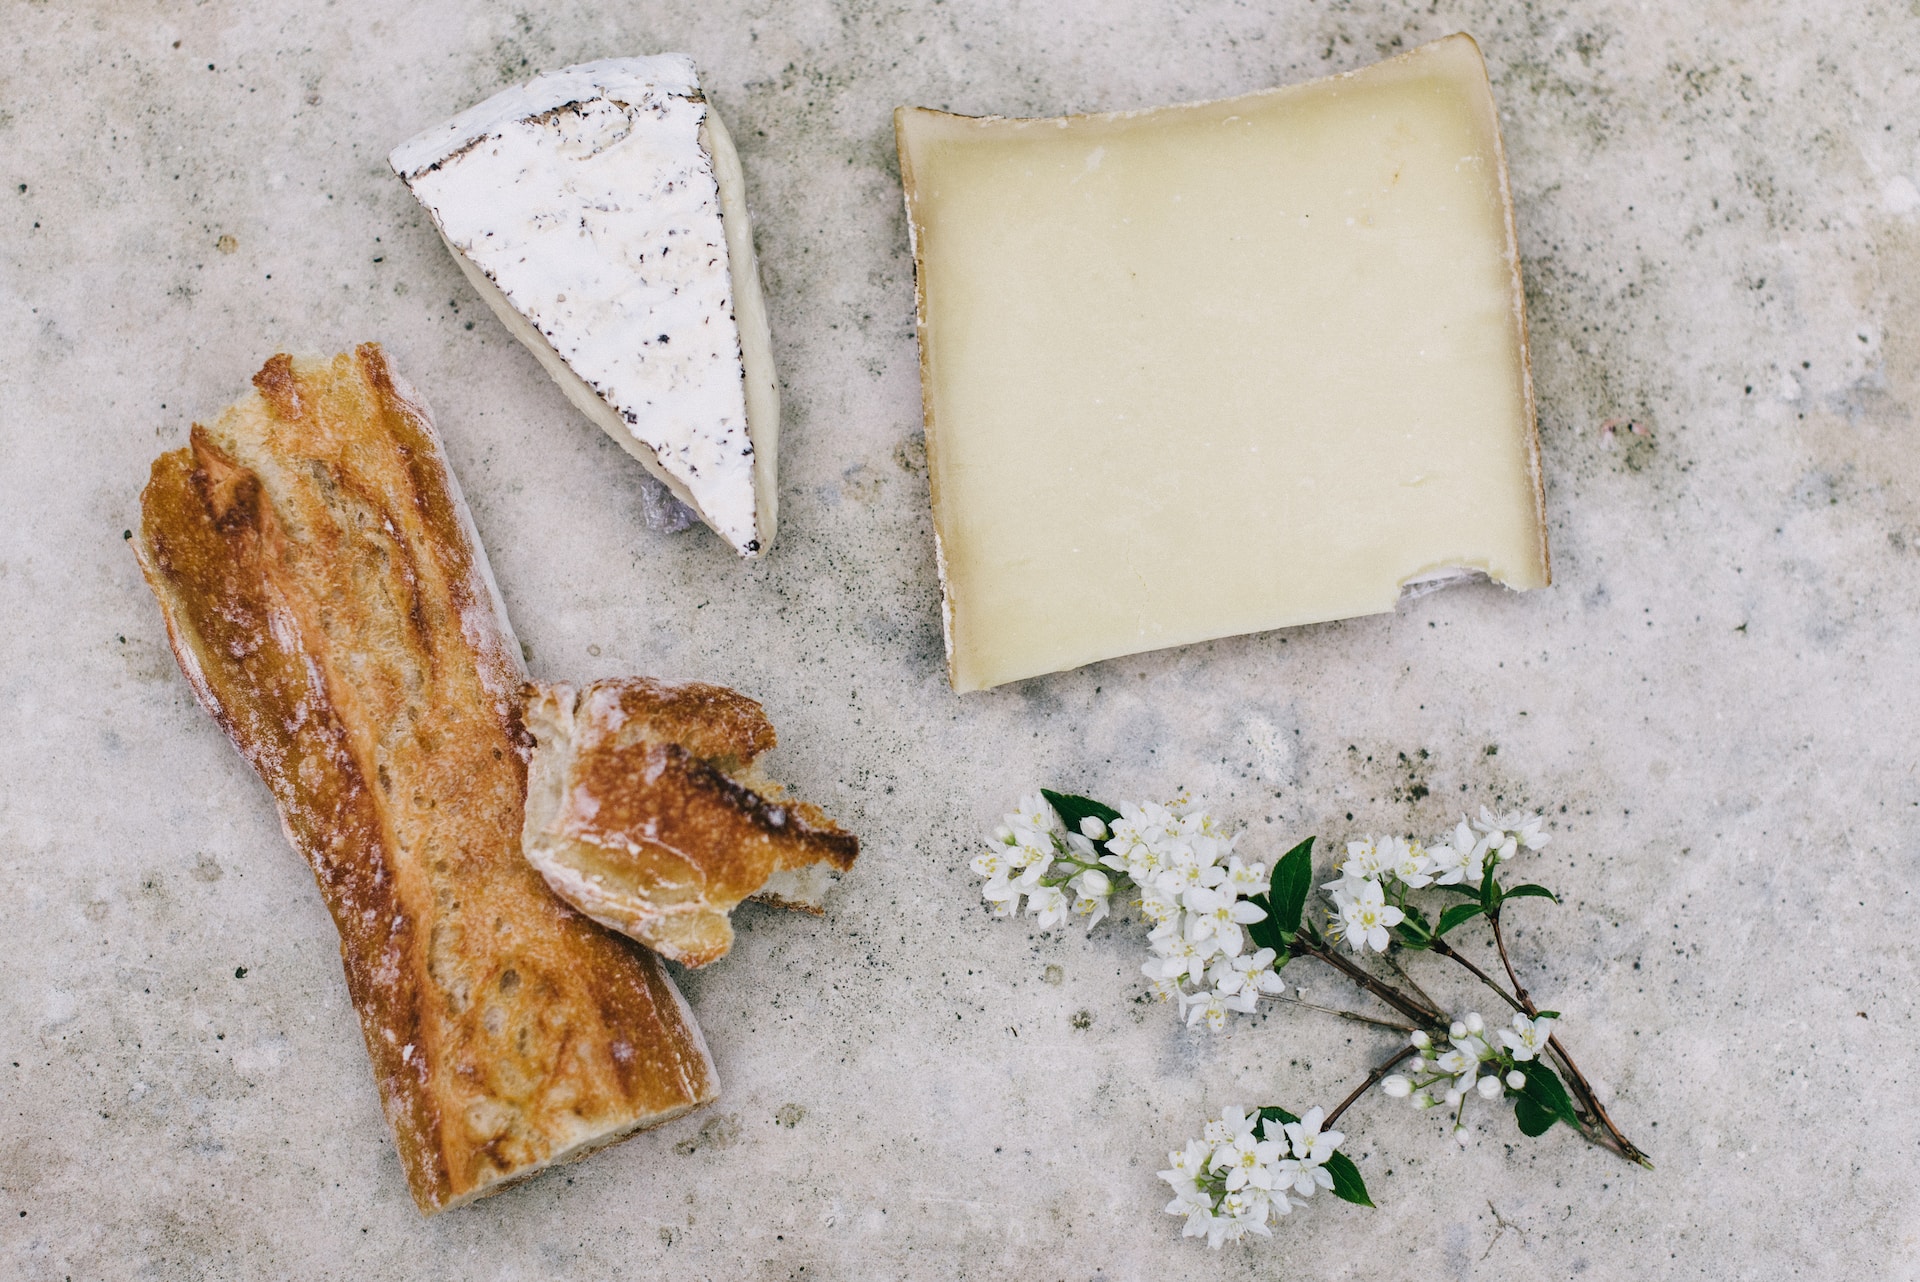 cheese, health images, flower images, toast, recipe, picnic, French, travel images, food shot, adventure, plant, free images